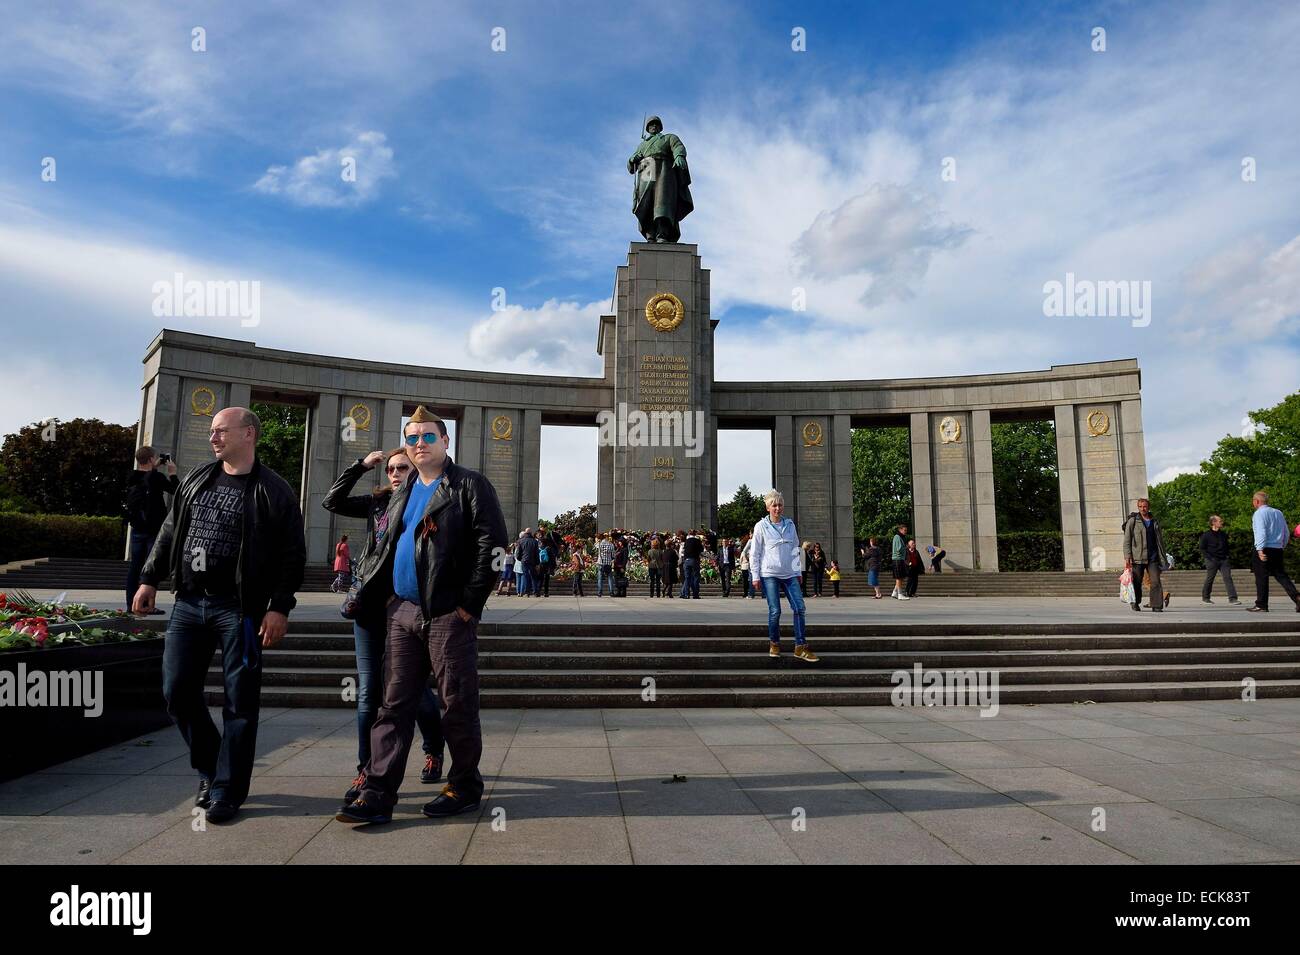 Germany, Berlin, Tiergaten district, Soviet memorial dedicated to the 81,116 soldiers of the Red Army that died during the Battle of Berlin in April-May 1945, annual celebration of the Nazi capitulation May 9, 1945 for Russians Stock Photo